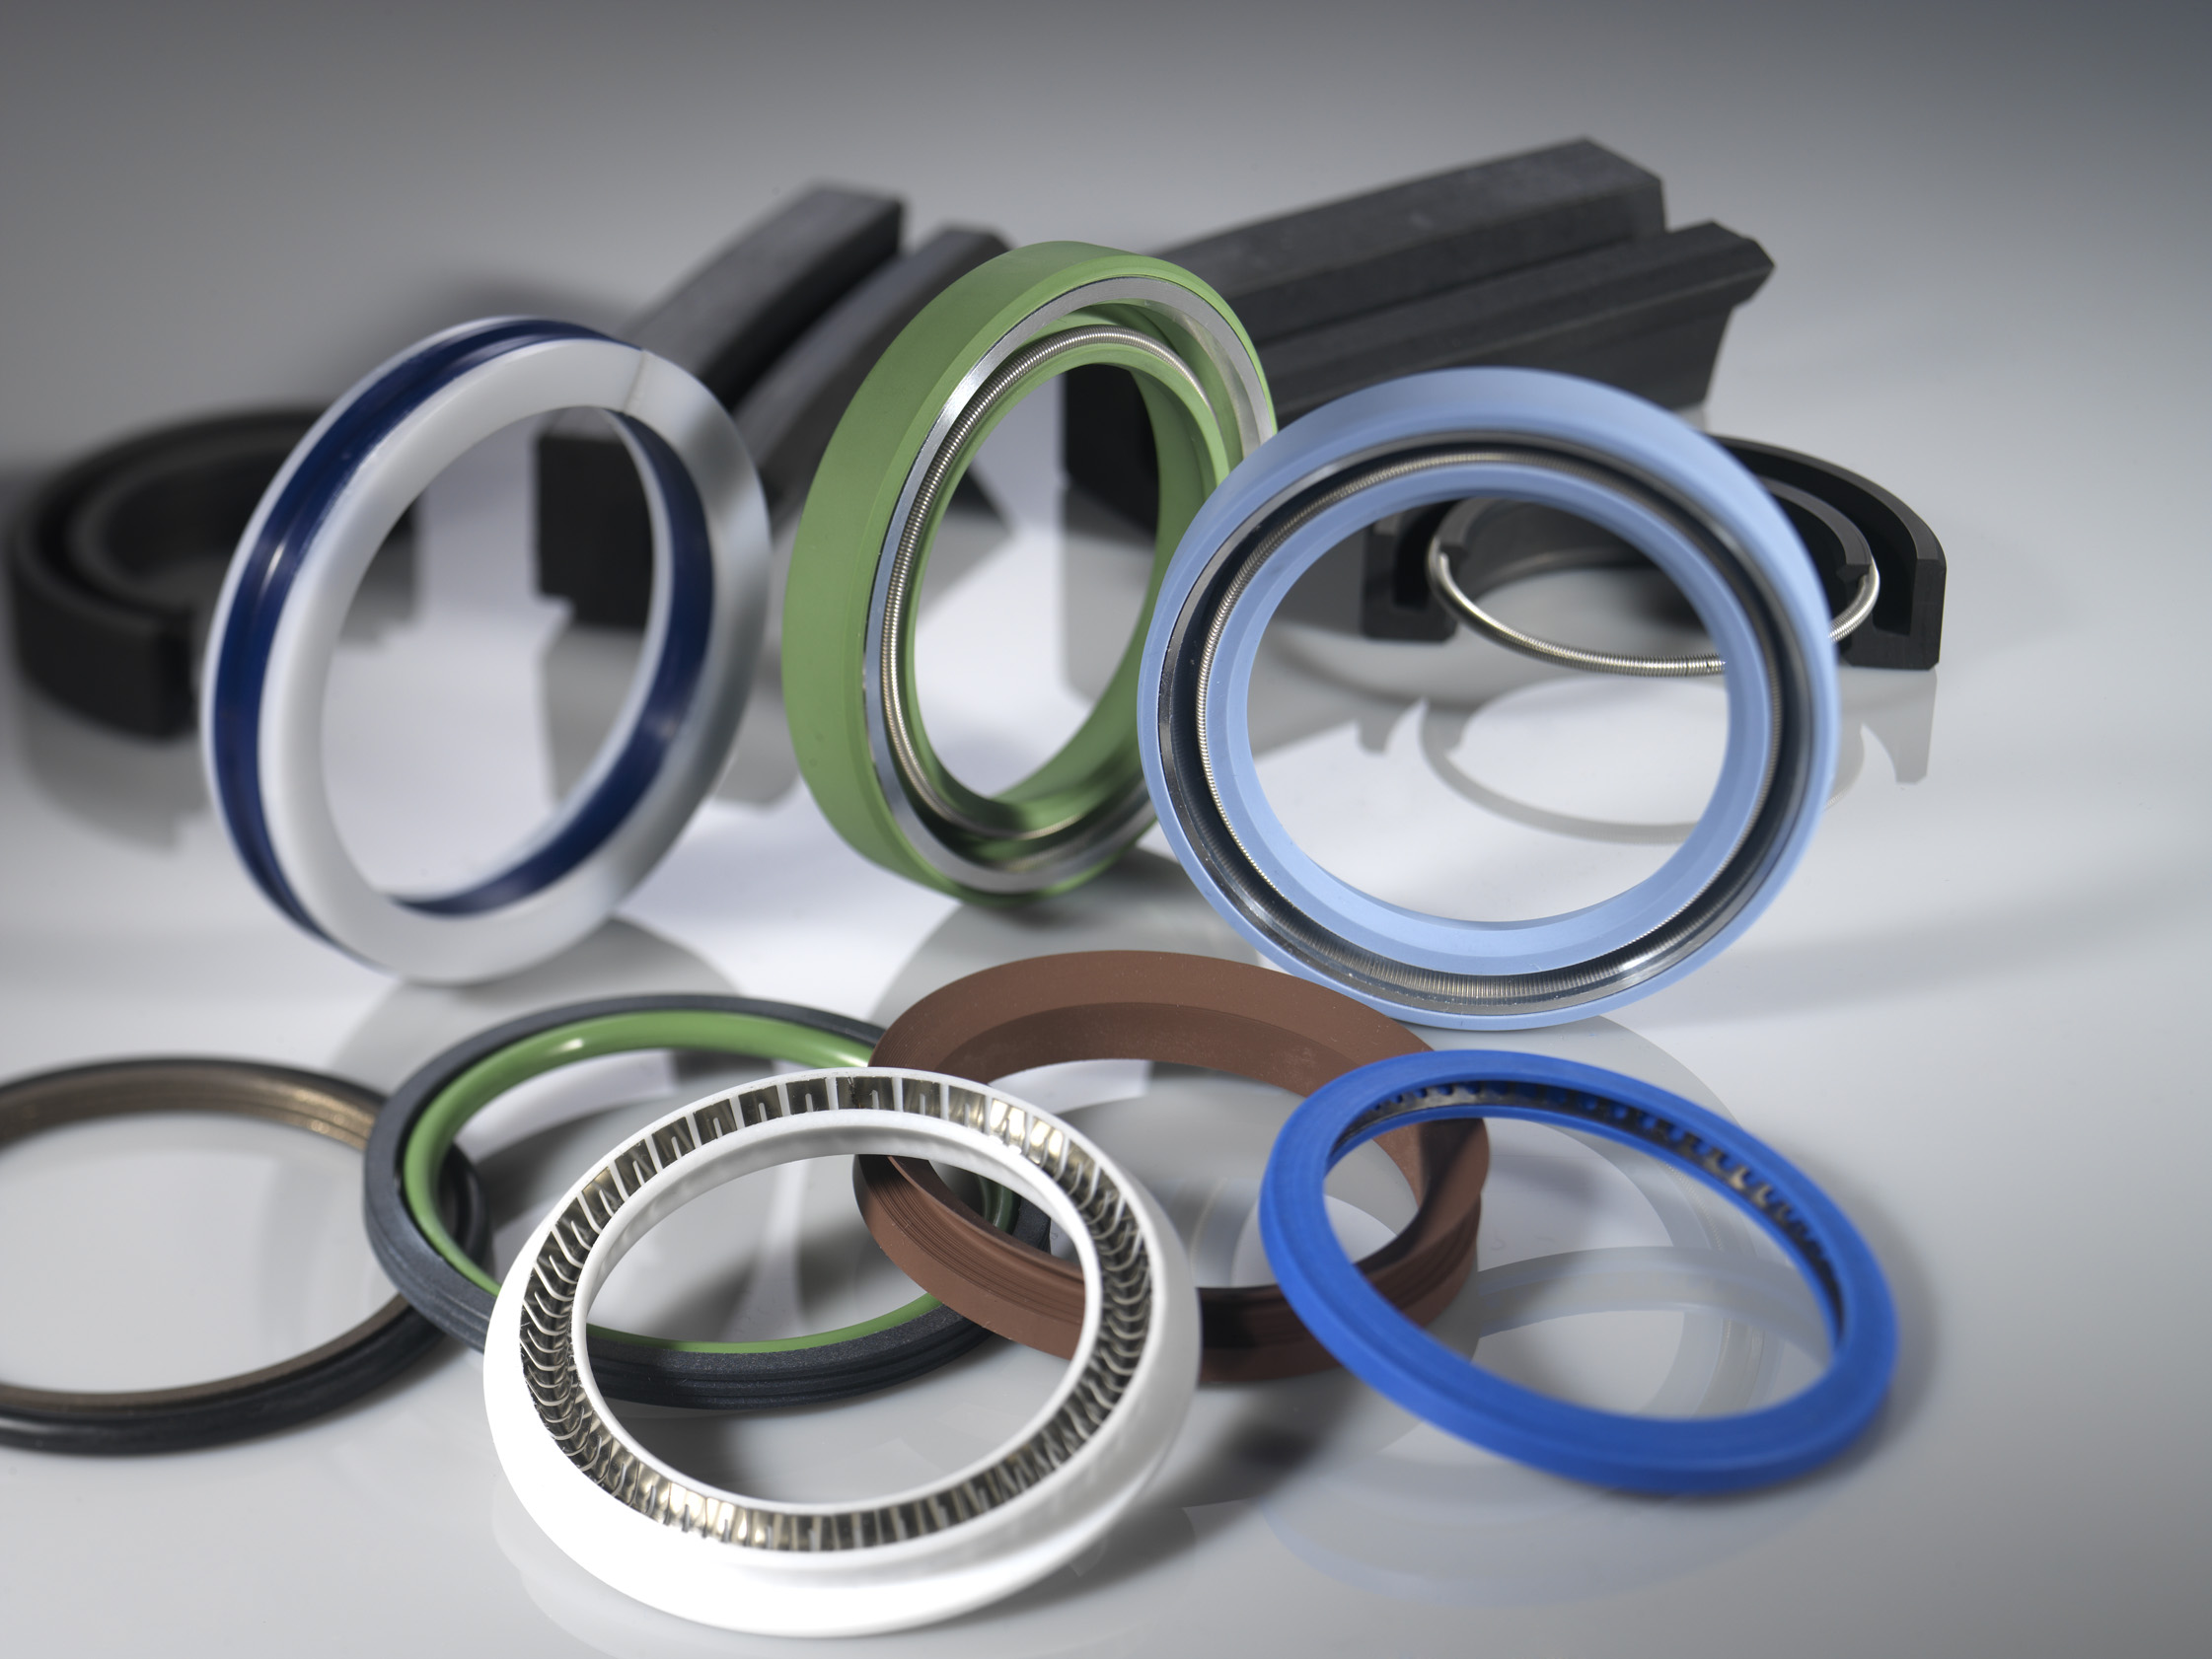 Gasco Gaskets - Gasco INC. - Welcome to Gasco Gaskets - Gasco INC. We are  leading Gaskets, O Ring, Seal Ring, & Gland Packings Manufacturers,  Suppliers, and Stockists in India. For Contact